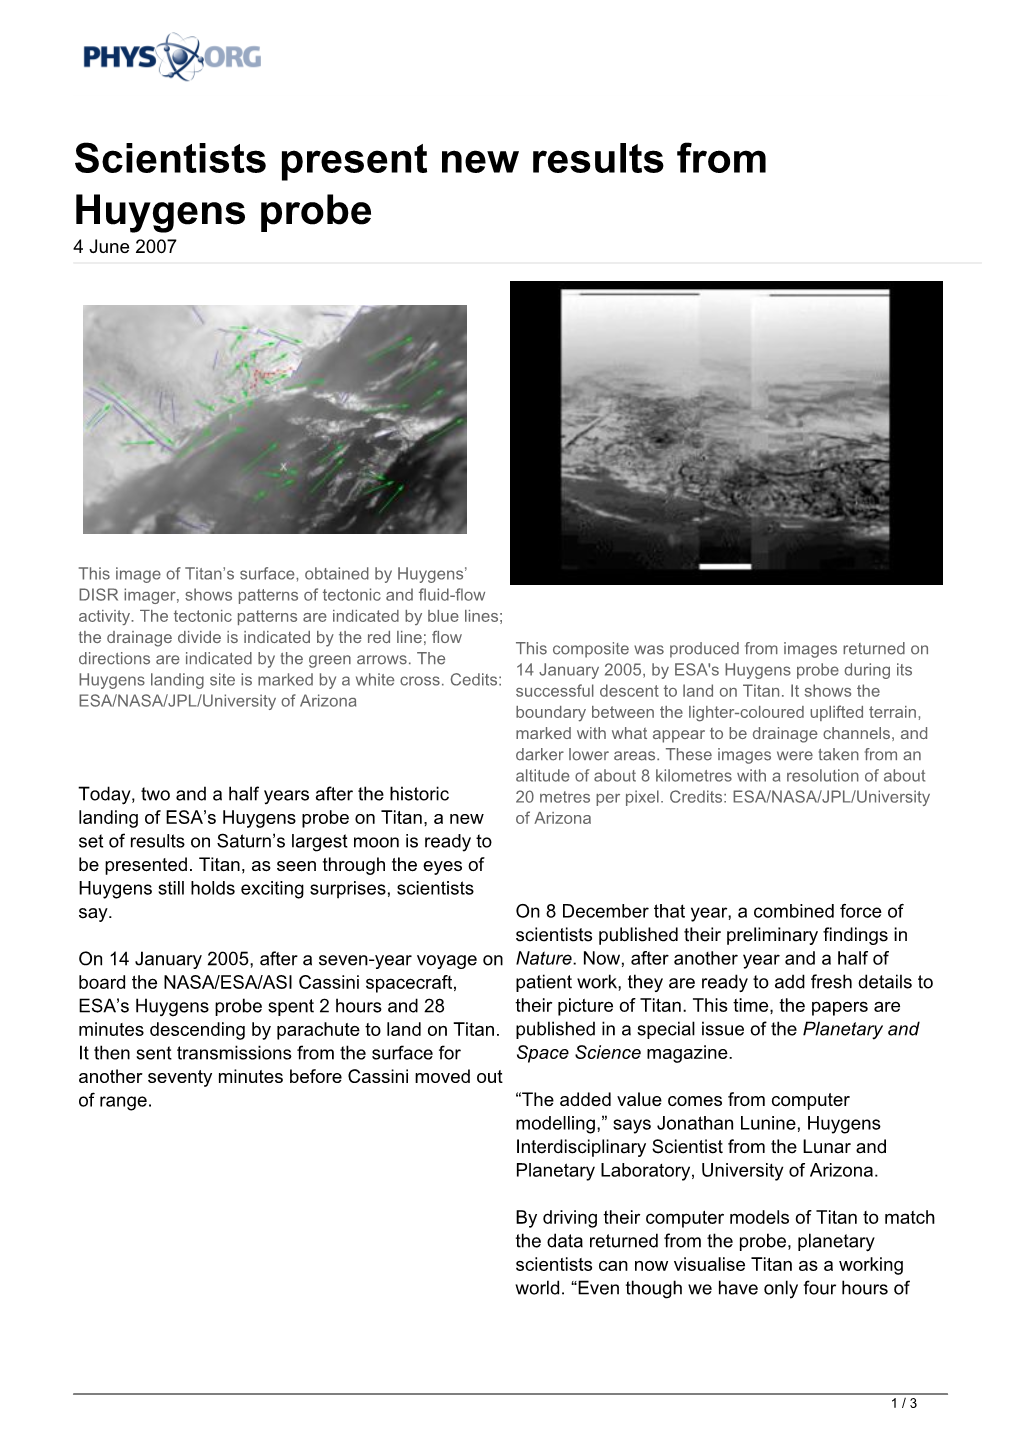 Scientists Present New Results from Huygens Probe 4 June 2007